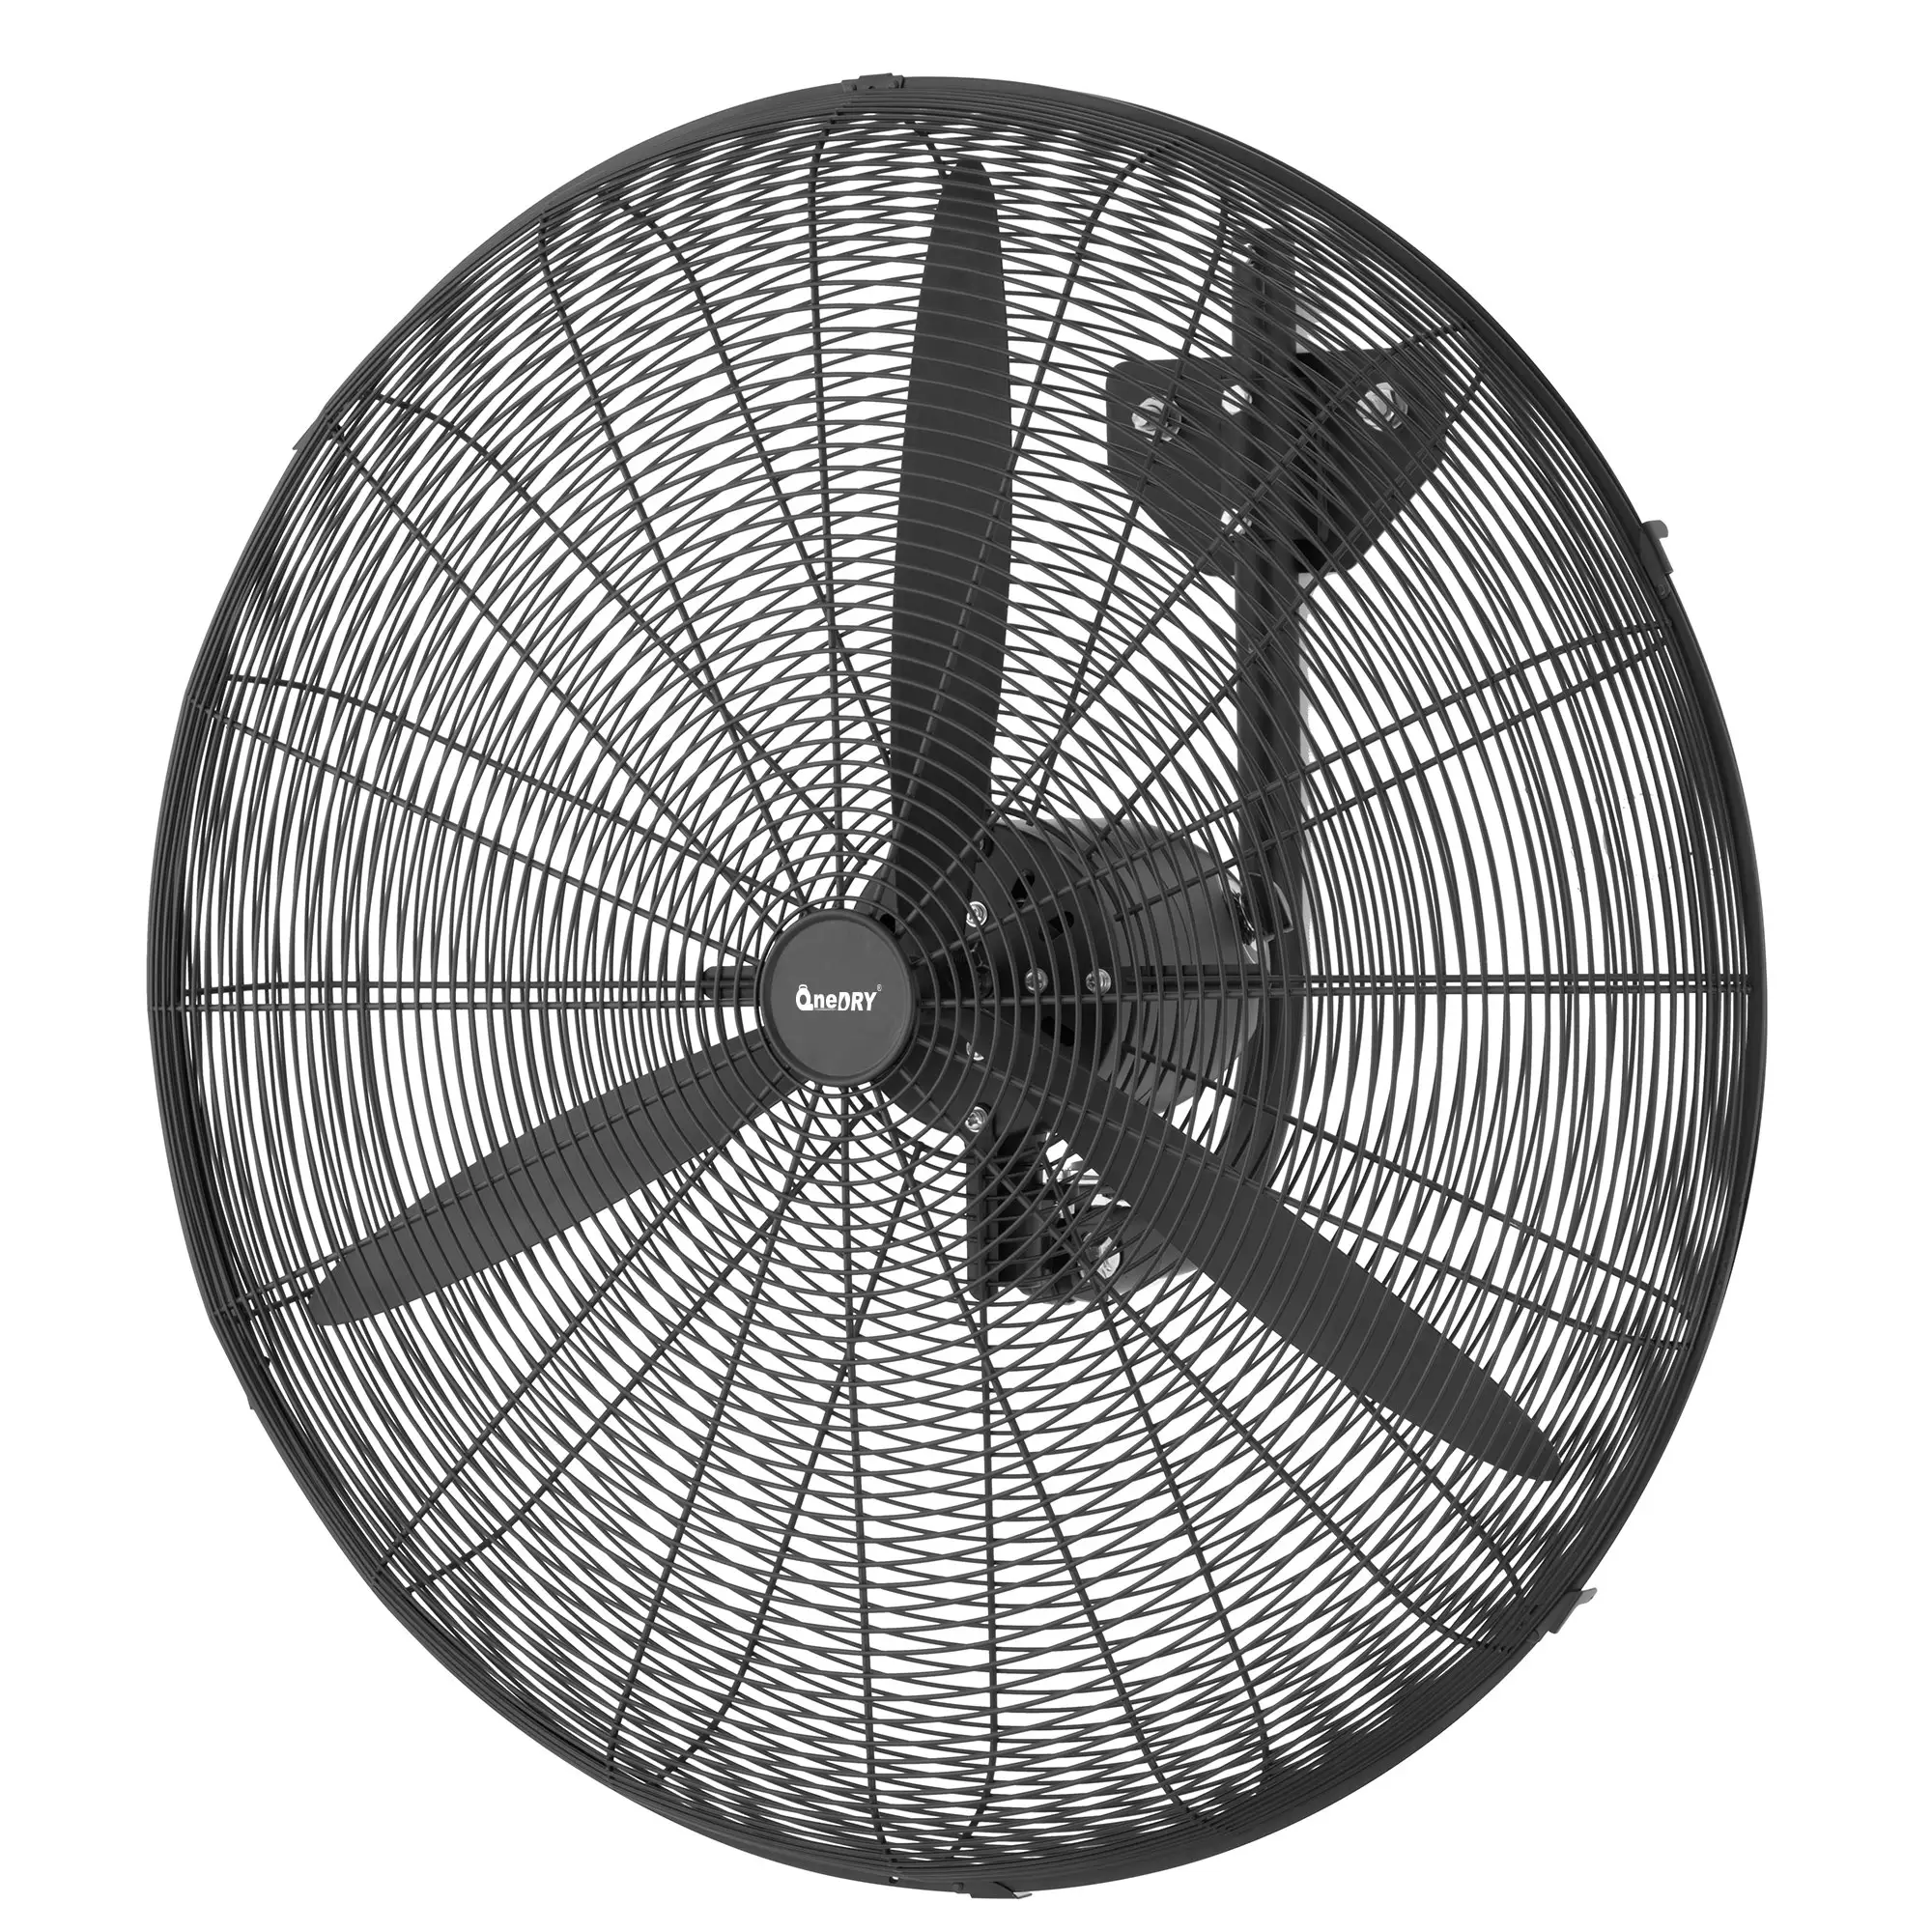 750mm high quality industrial electric exhaust oscillating cooling Wall Mounted fan air cooling industrial ceiling fan